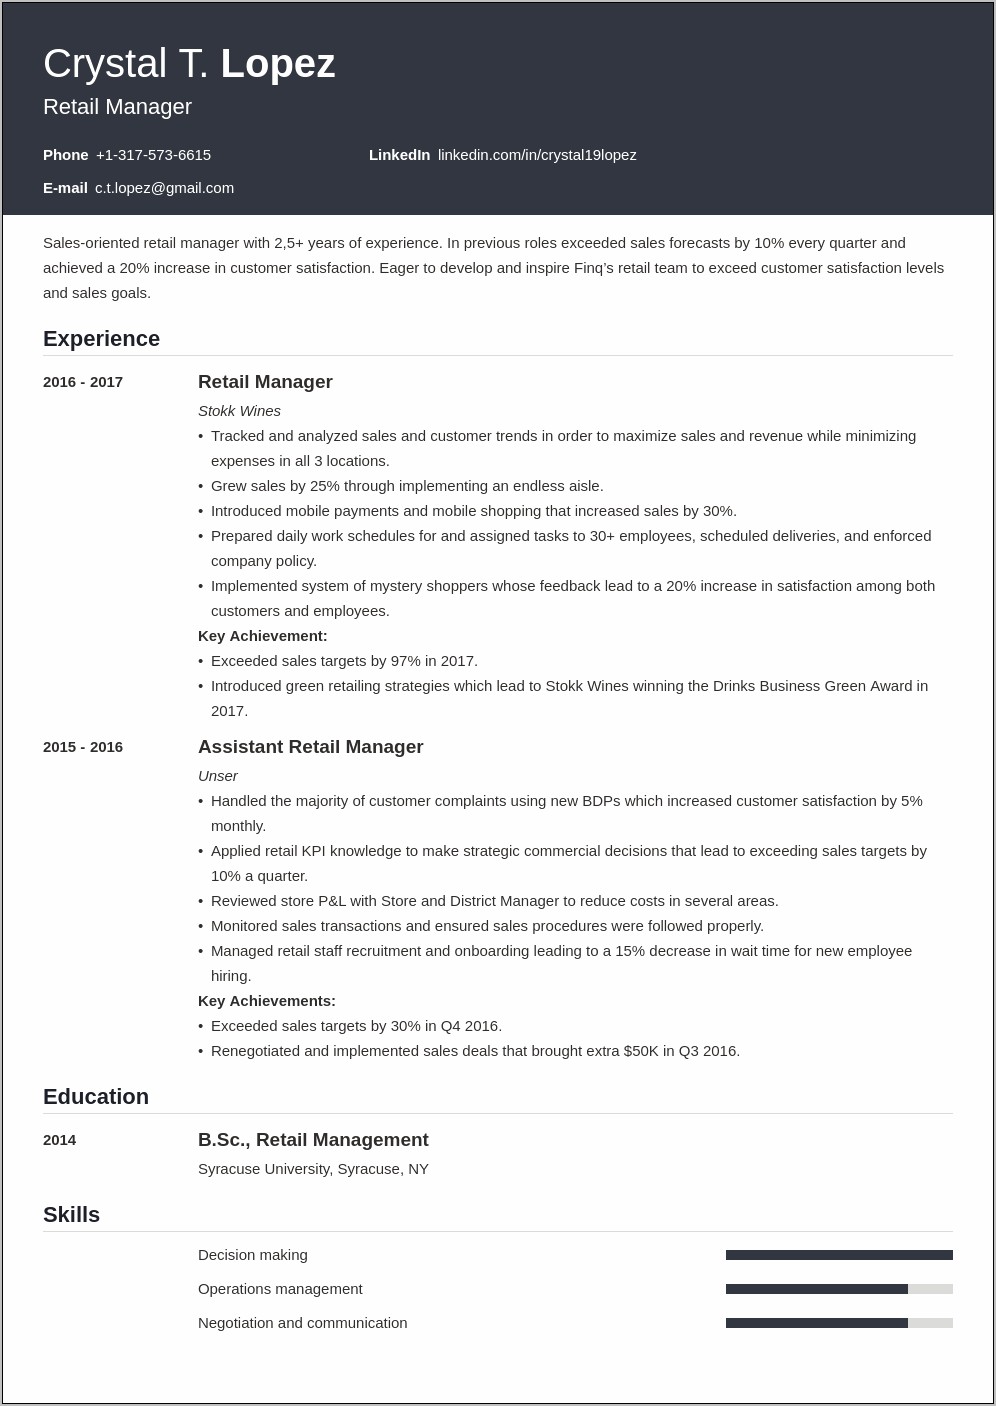 Sample Resume Summary For Retail